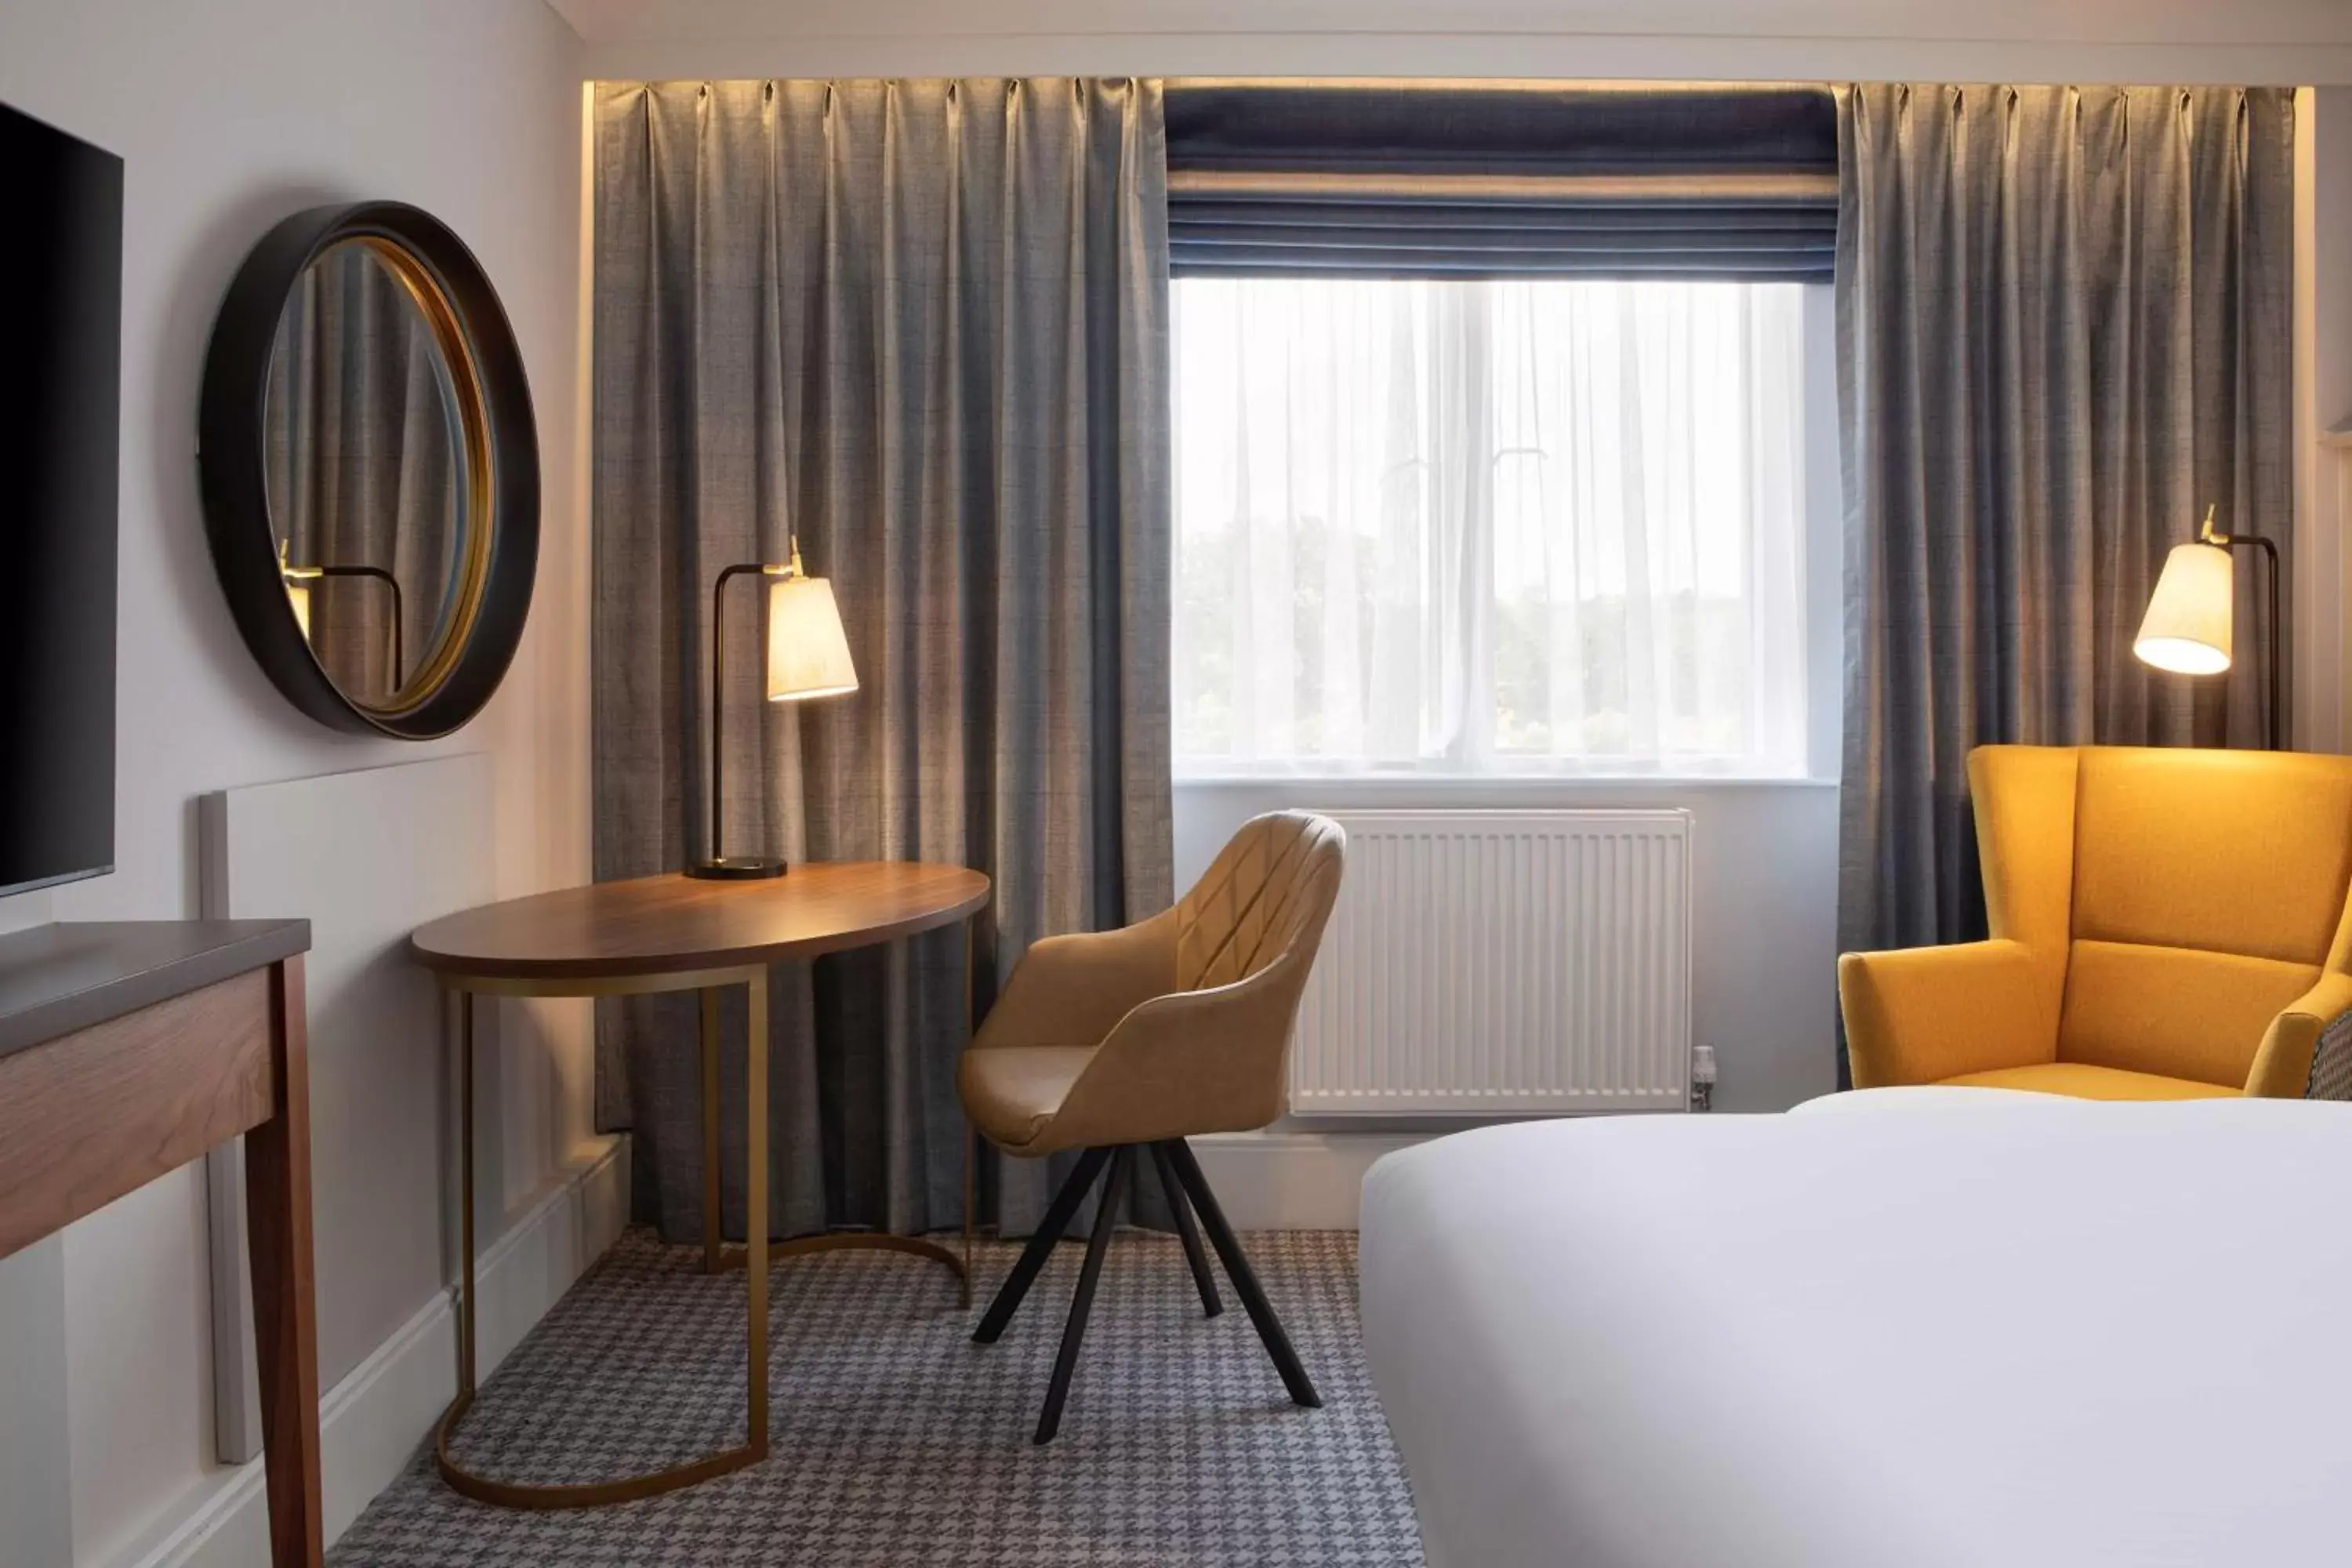 Bedroom, Seating Area in DoubleTree by Hilton Stoke-on-Trent, United Kingdom